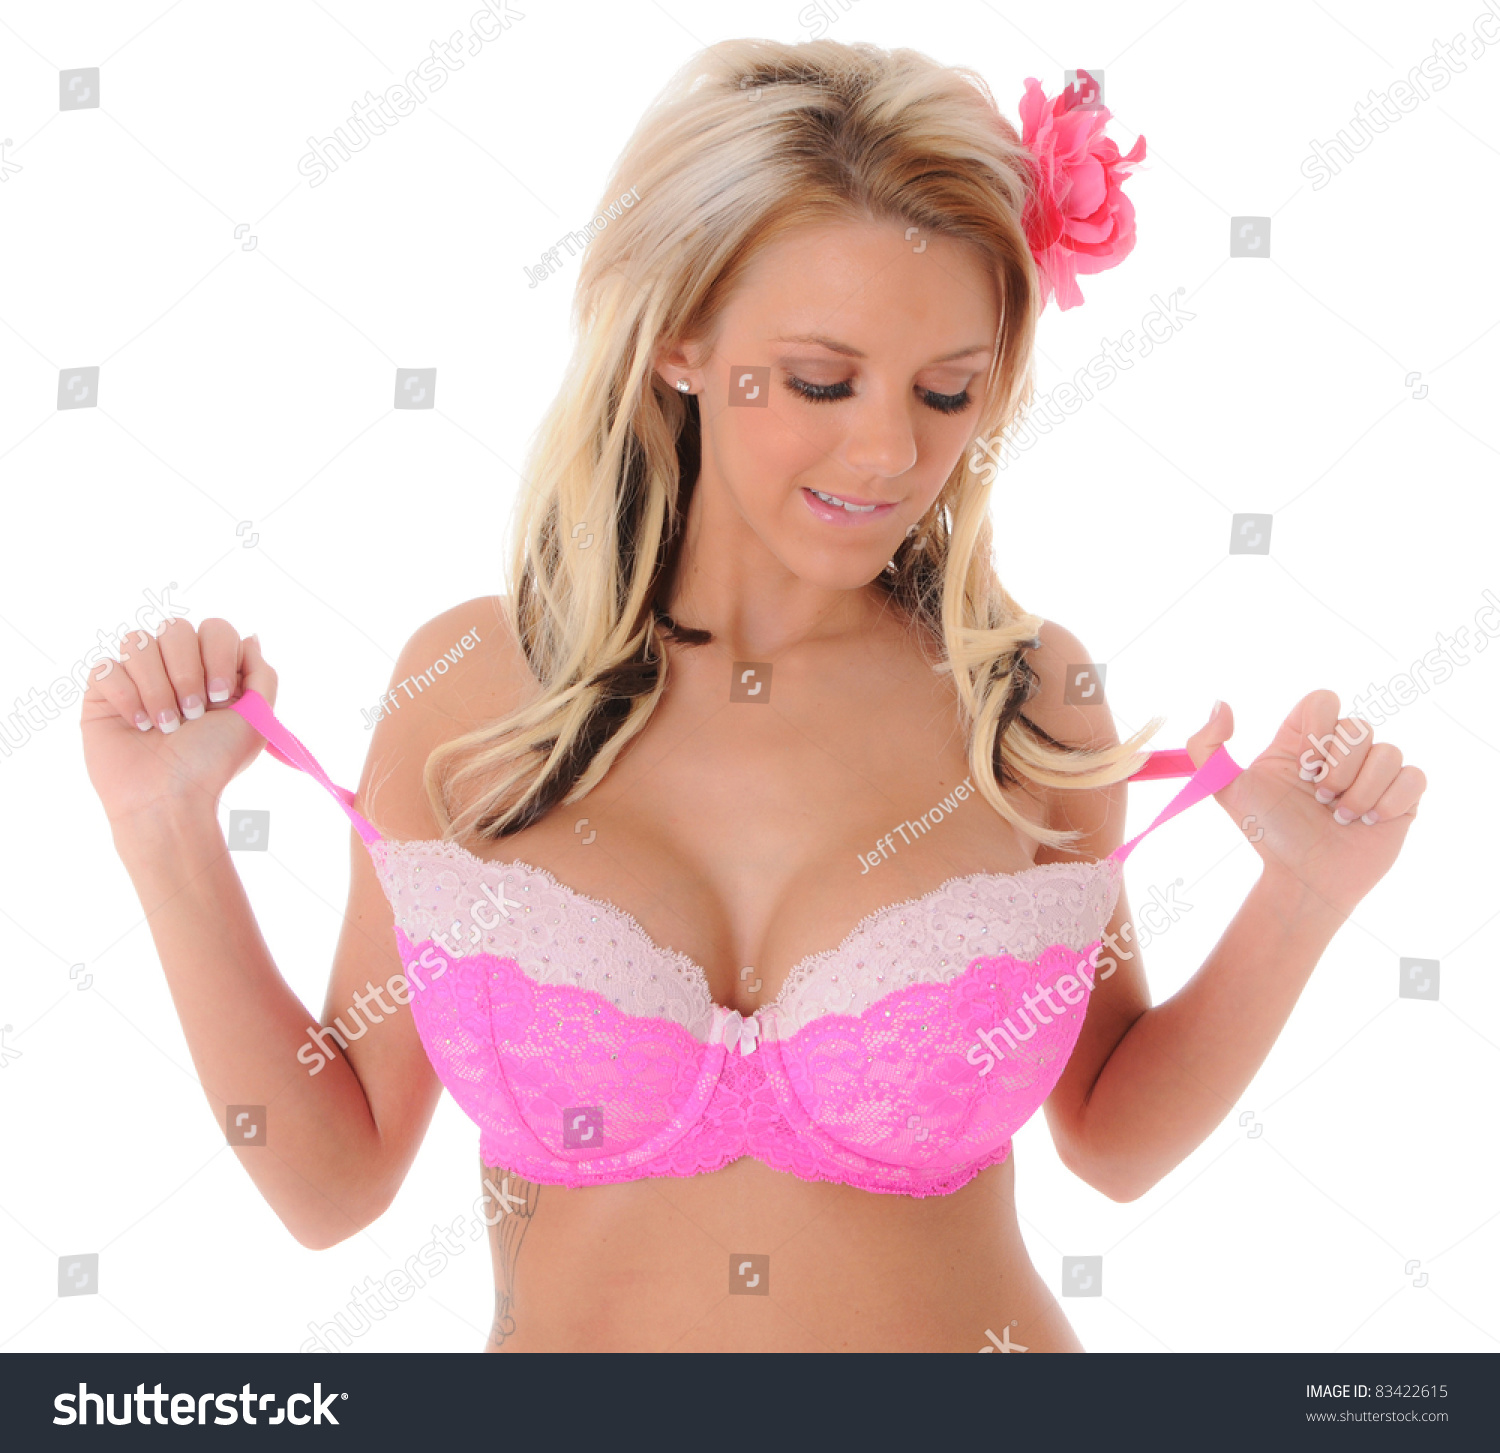 Woman Removing Pink Lingerie Top Stock Photo Shutterstock